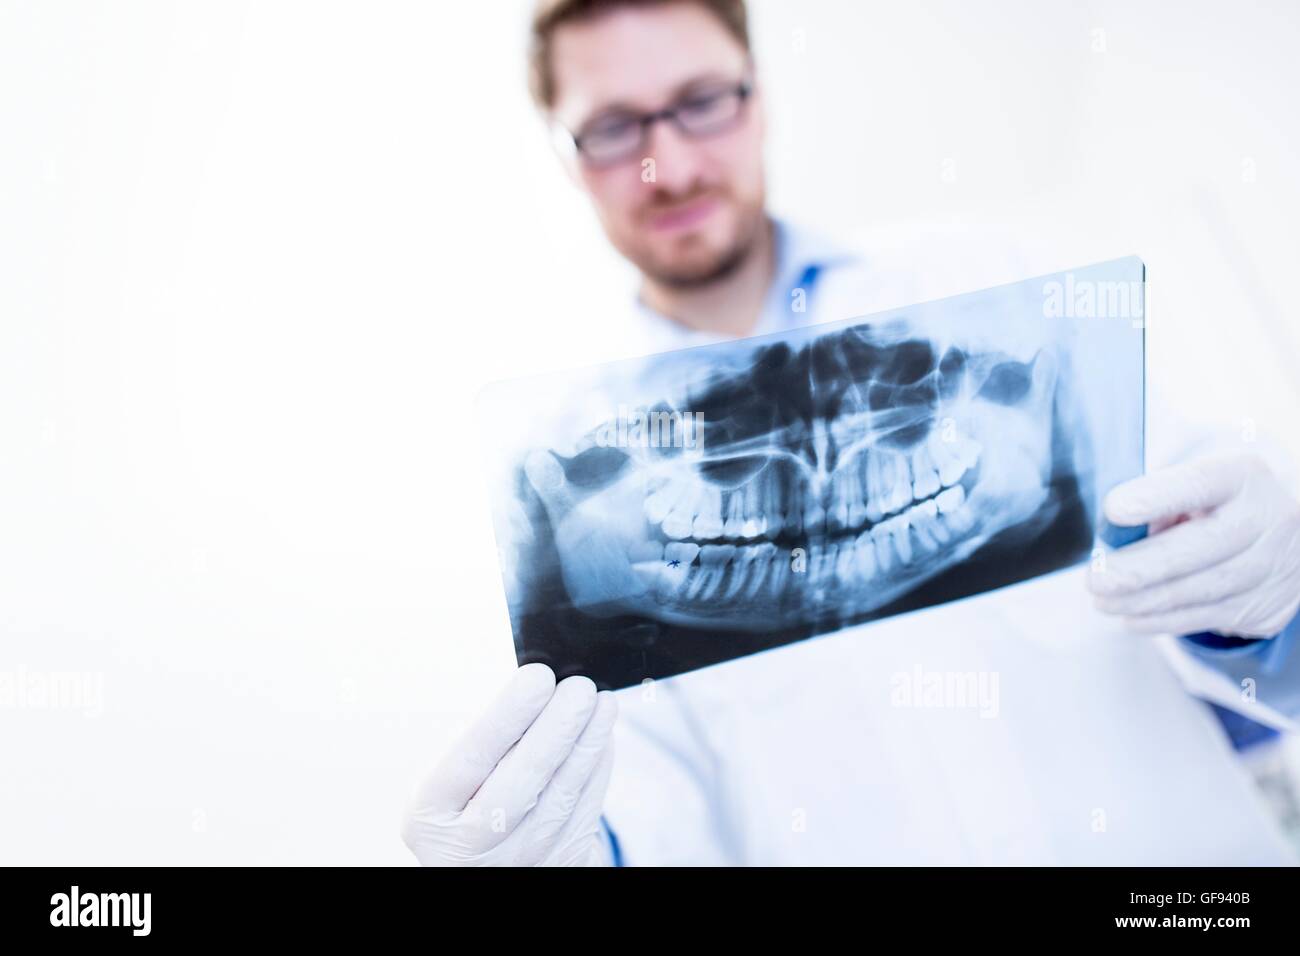 MODEL RELEASED. Dentist and dental assistant looking at x-ray image. Stock Photo